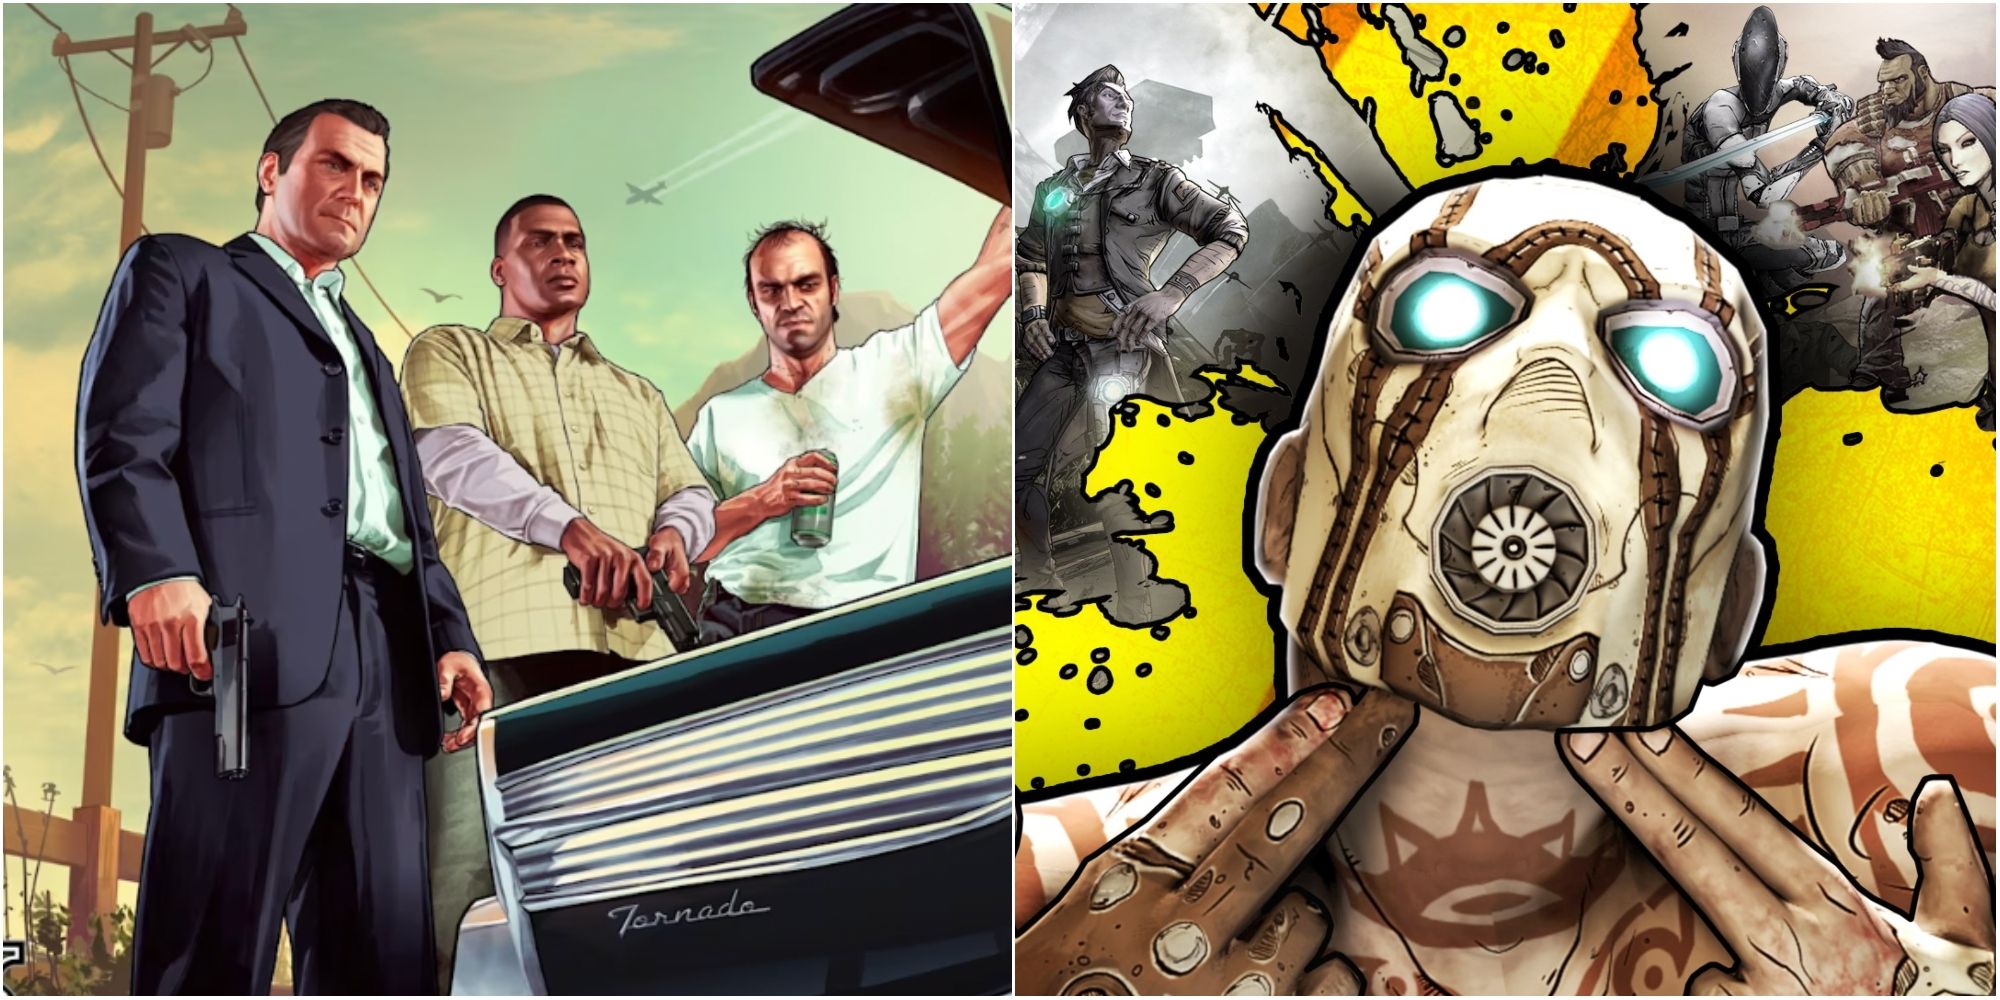 Michael, Trevor and Franklin from GTA 5 and the cover of Borderlands 2